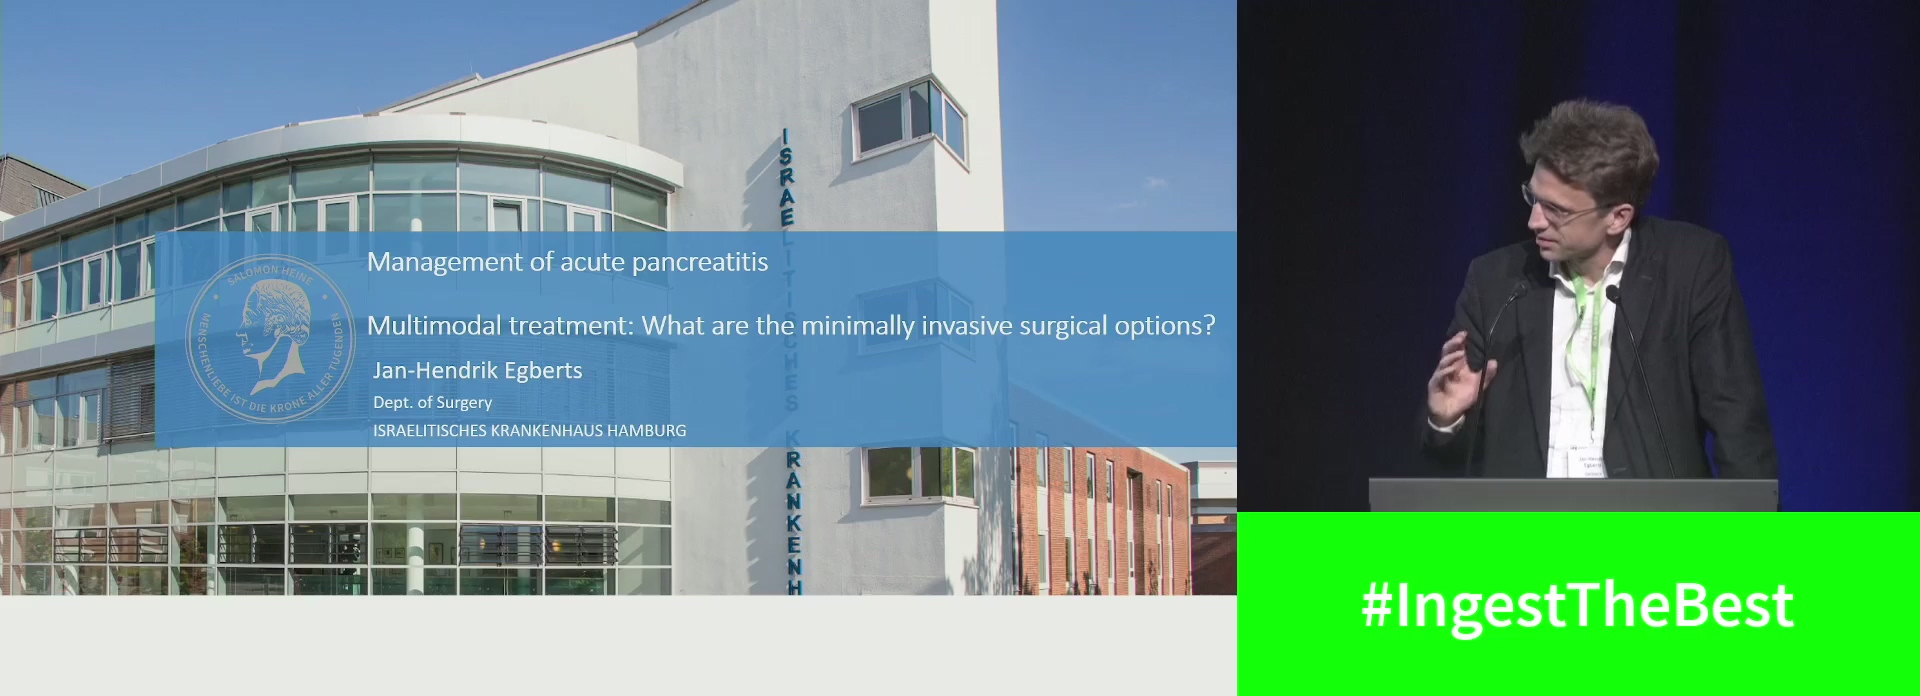 Multimodal treatment: What are the minimally invasive surgical options?